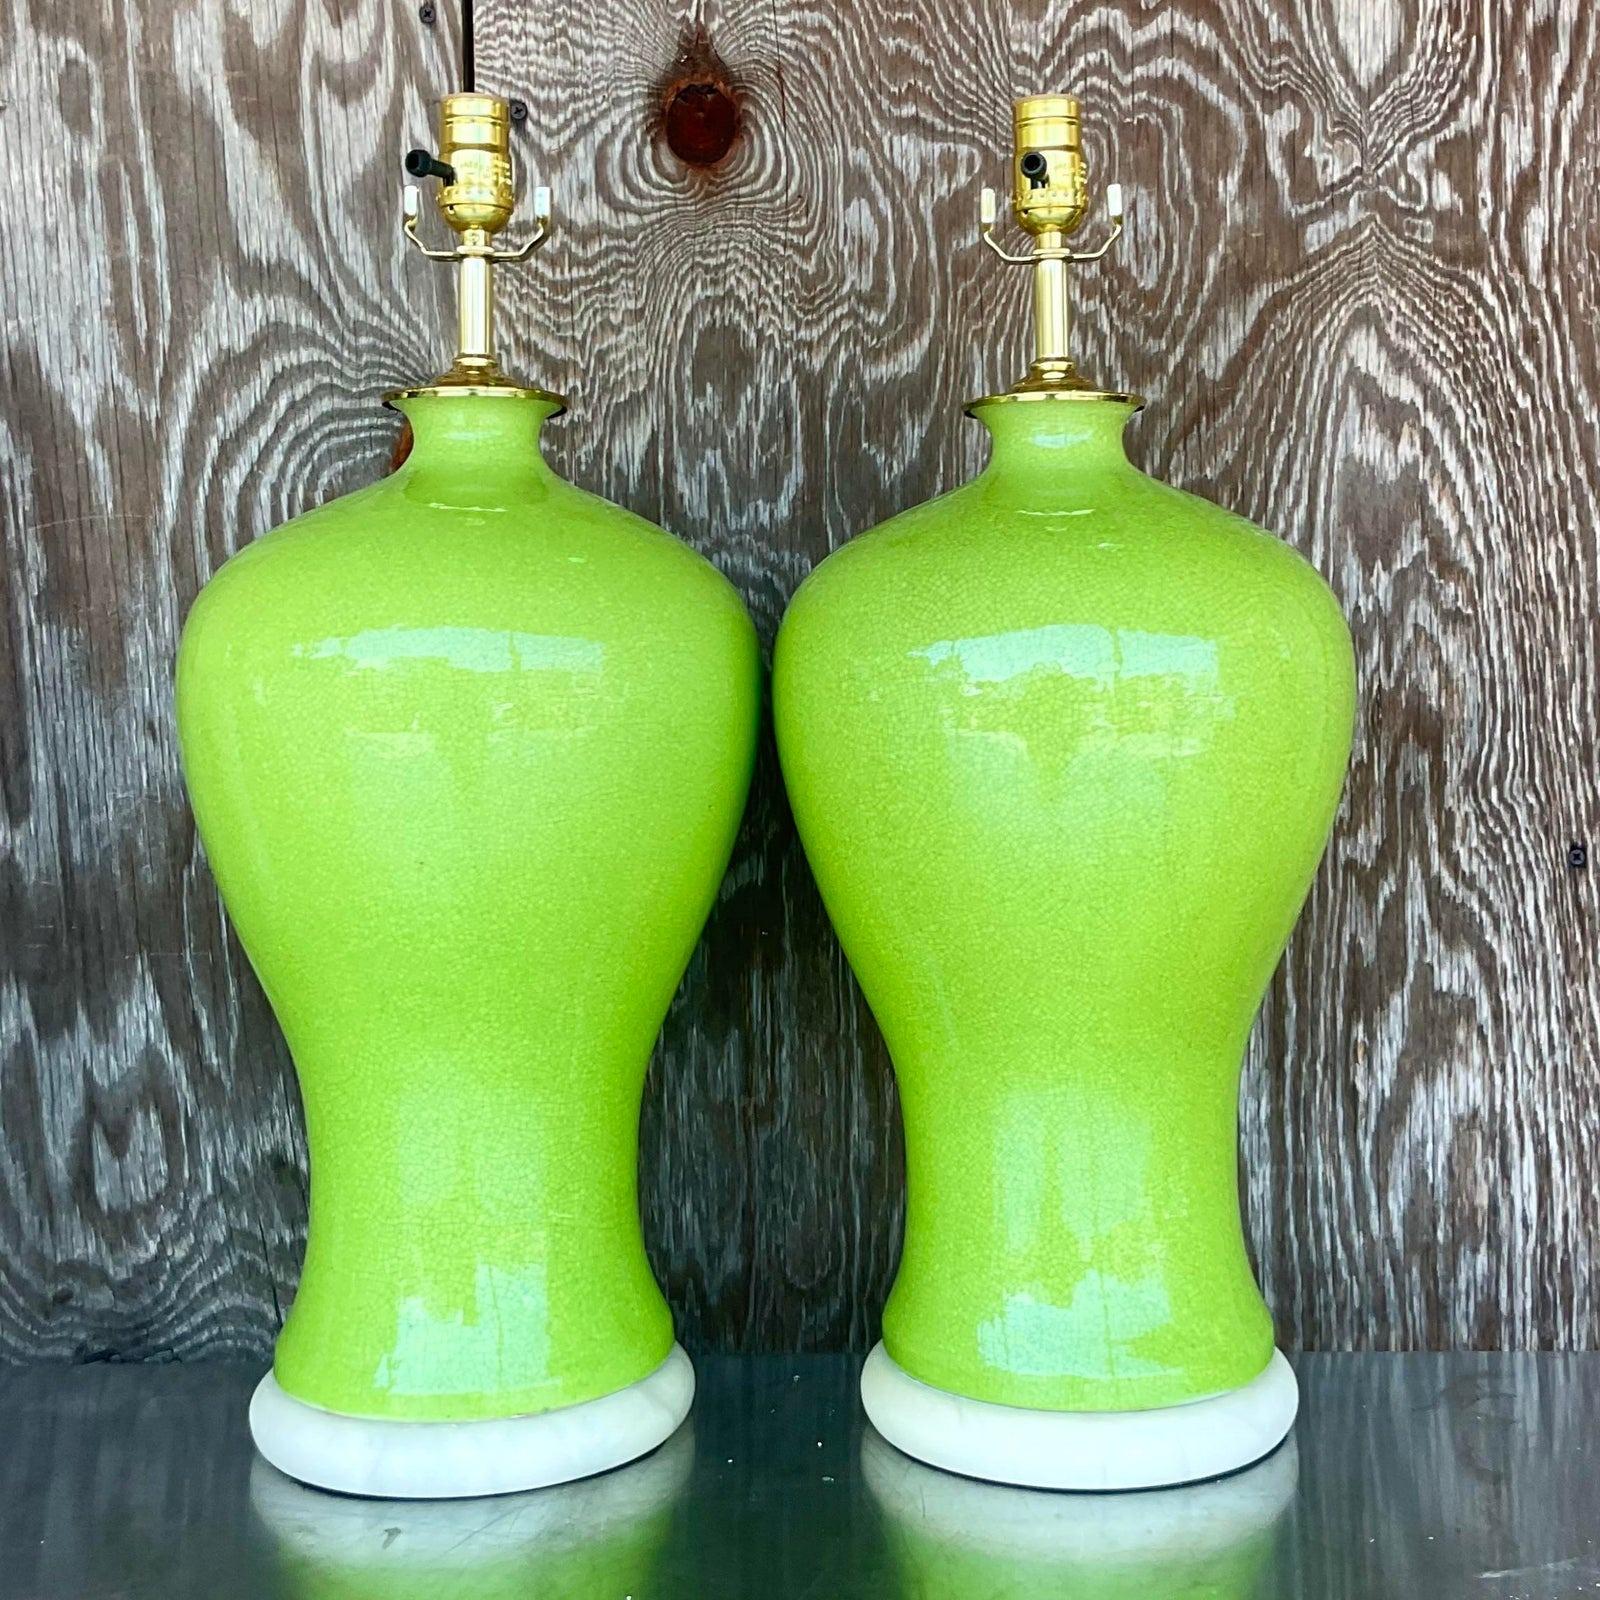 A fabulous pair of vintage Regency table lamps. A brilliant Apple green urn shape in a crackle glaze finish. Rest on an incredible pair of vintage solid Alabaster plinths. Fully restored with all new wiring and hardware. Acquired from a Palm Beach